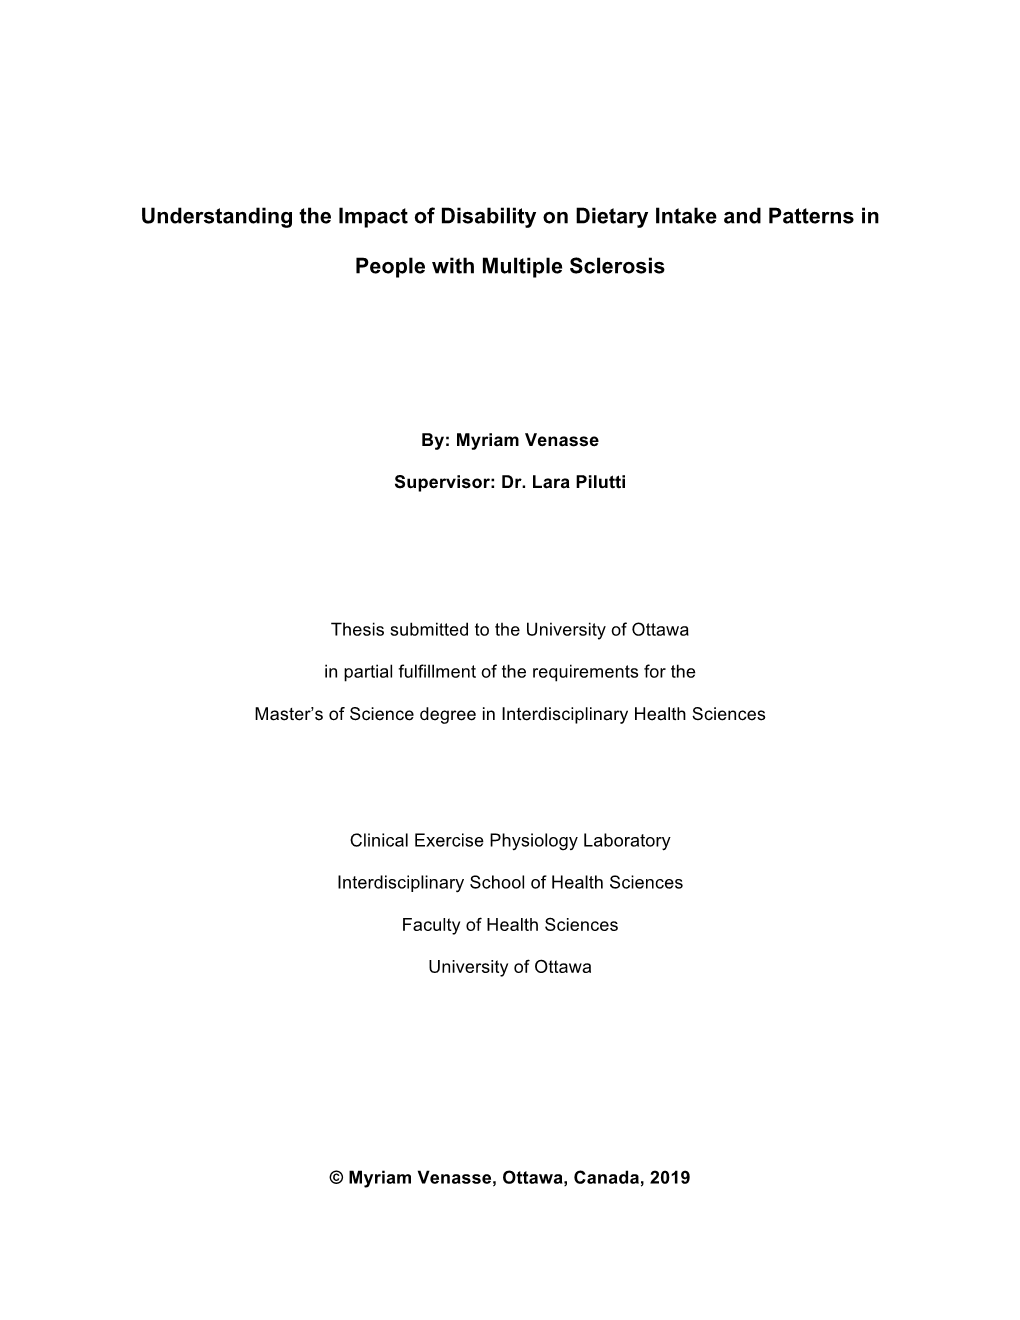 Understanding the Impact of Disability on Dietary Intake and Patterns In